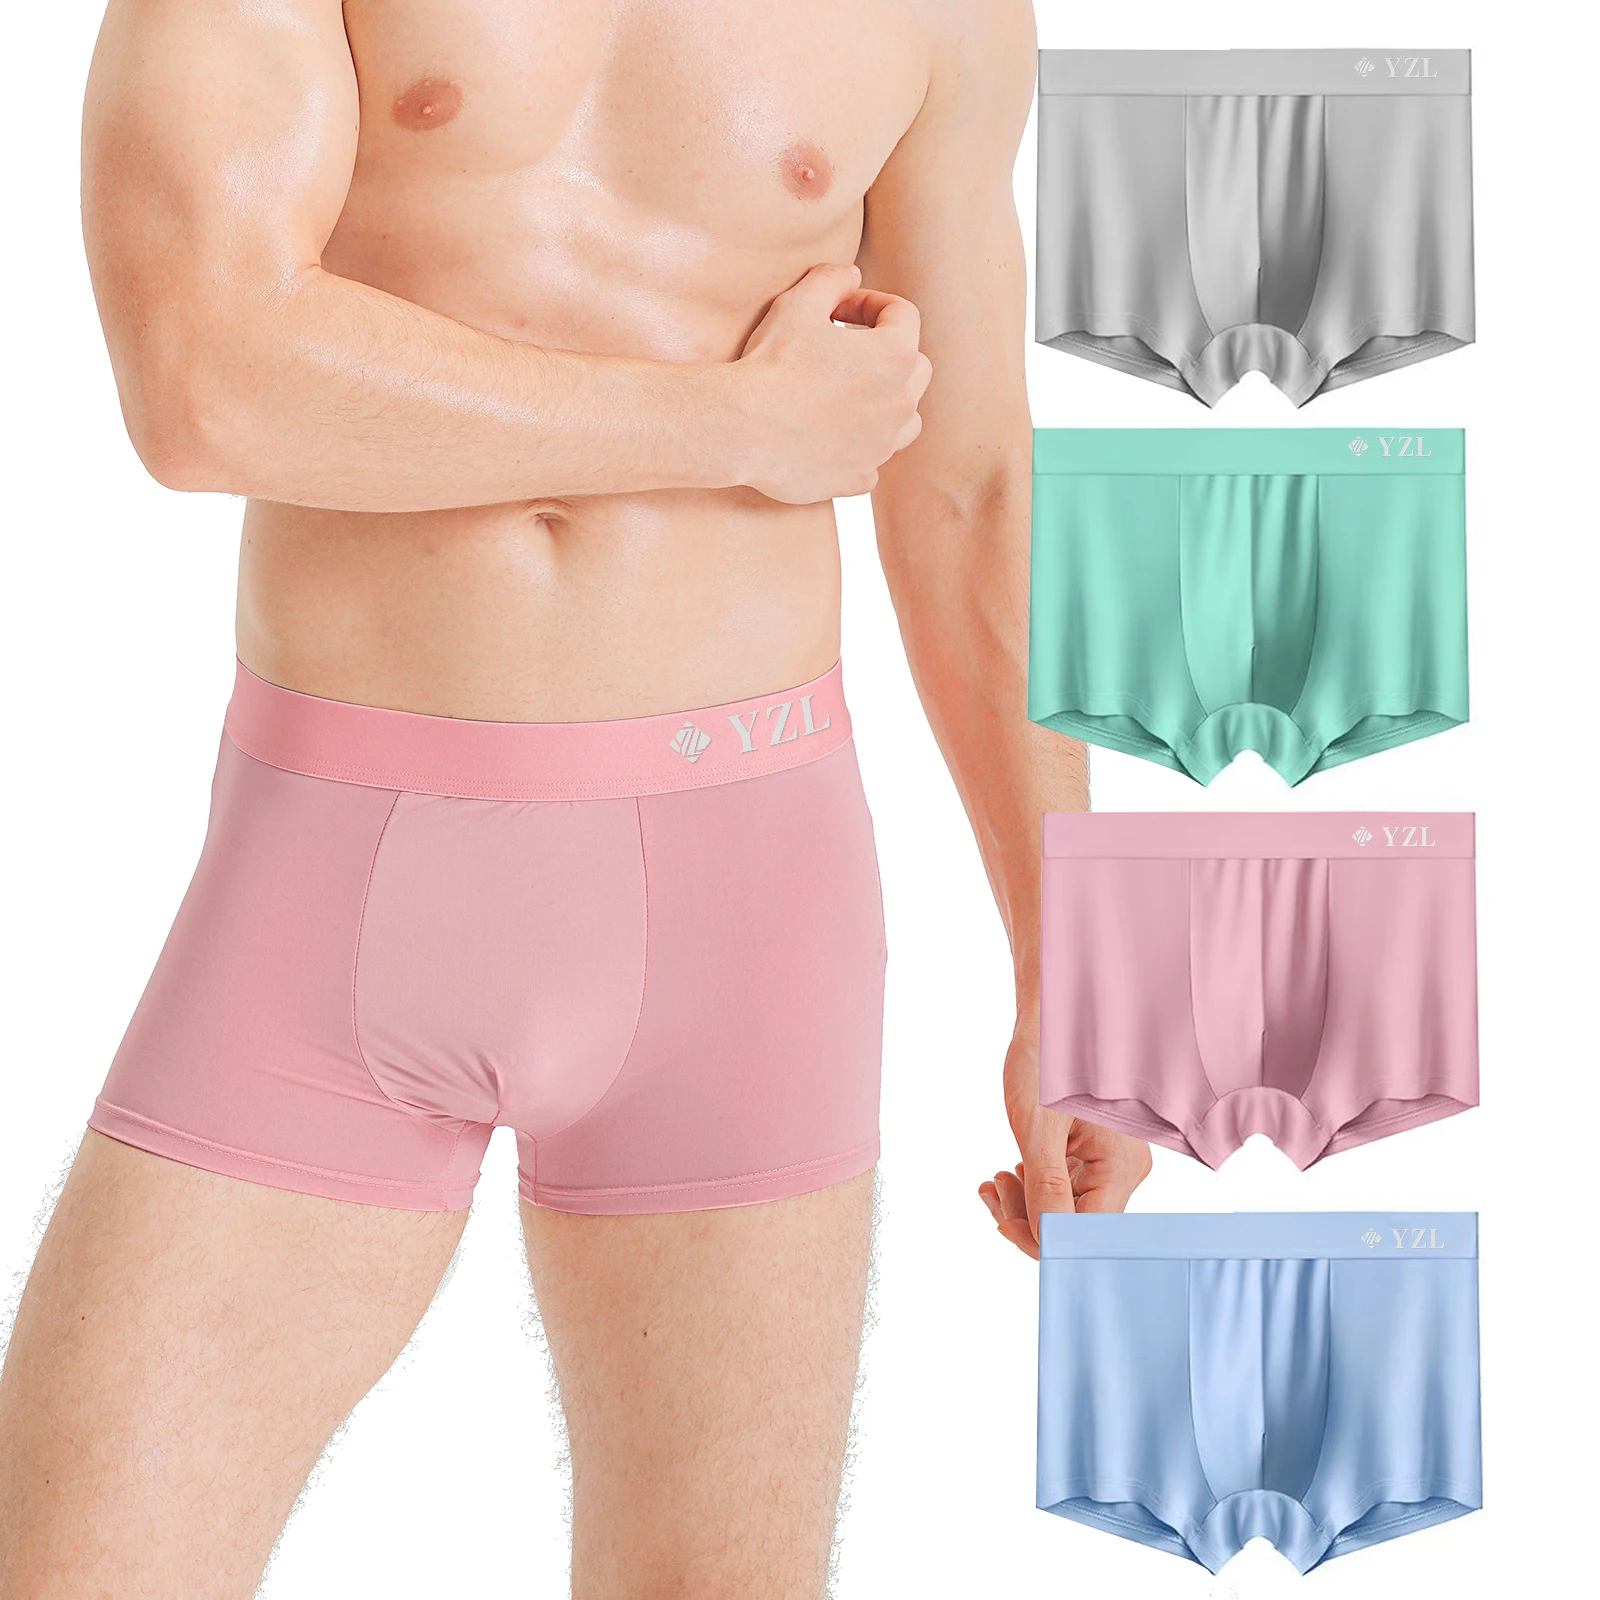 Men's Underwear ice Silk Flat Corner Shorts pants Summer Thin Antibacterial Modal Large Boys' Seamless Top Quality with Gift Box men s underwear ice silk flat corner shorts pants summer thin antibacterial modal large boys seamless top quality with gift box